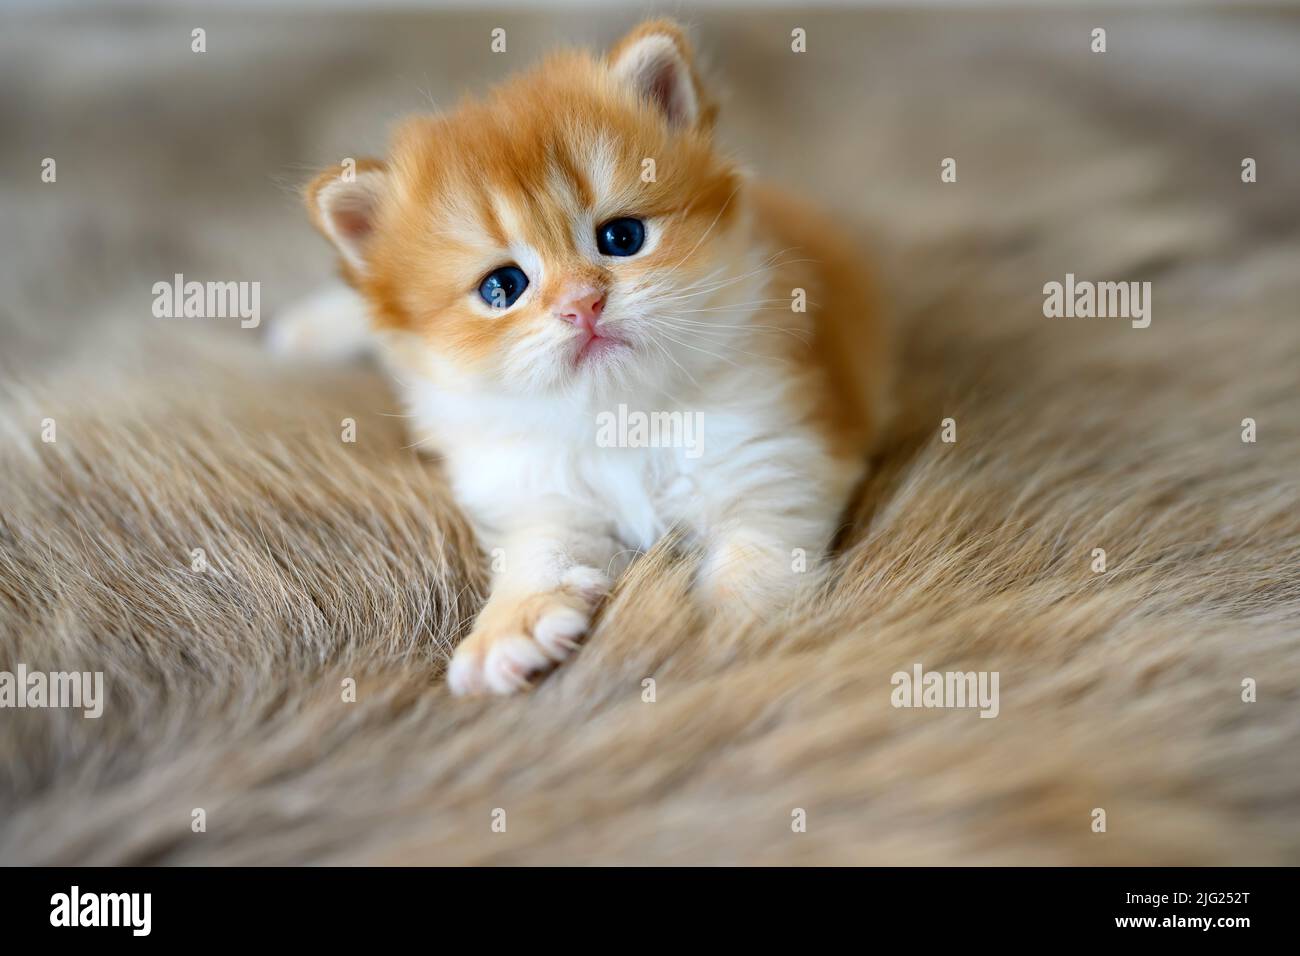 Golden British Shorthair Kitten Sit comfortably on a fur rug. view from the front of the little cat pretty and cute very good pedigree Pose to relax a Stock Photo